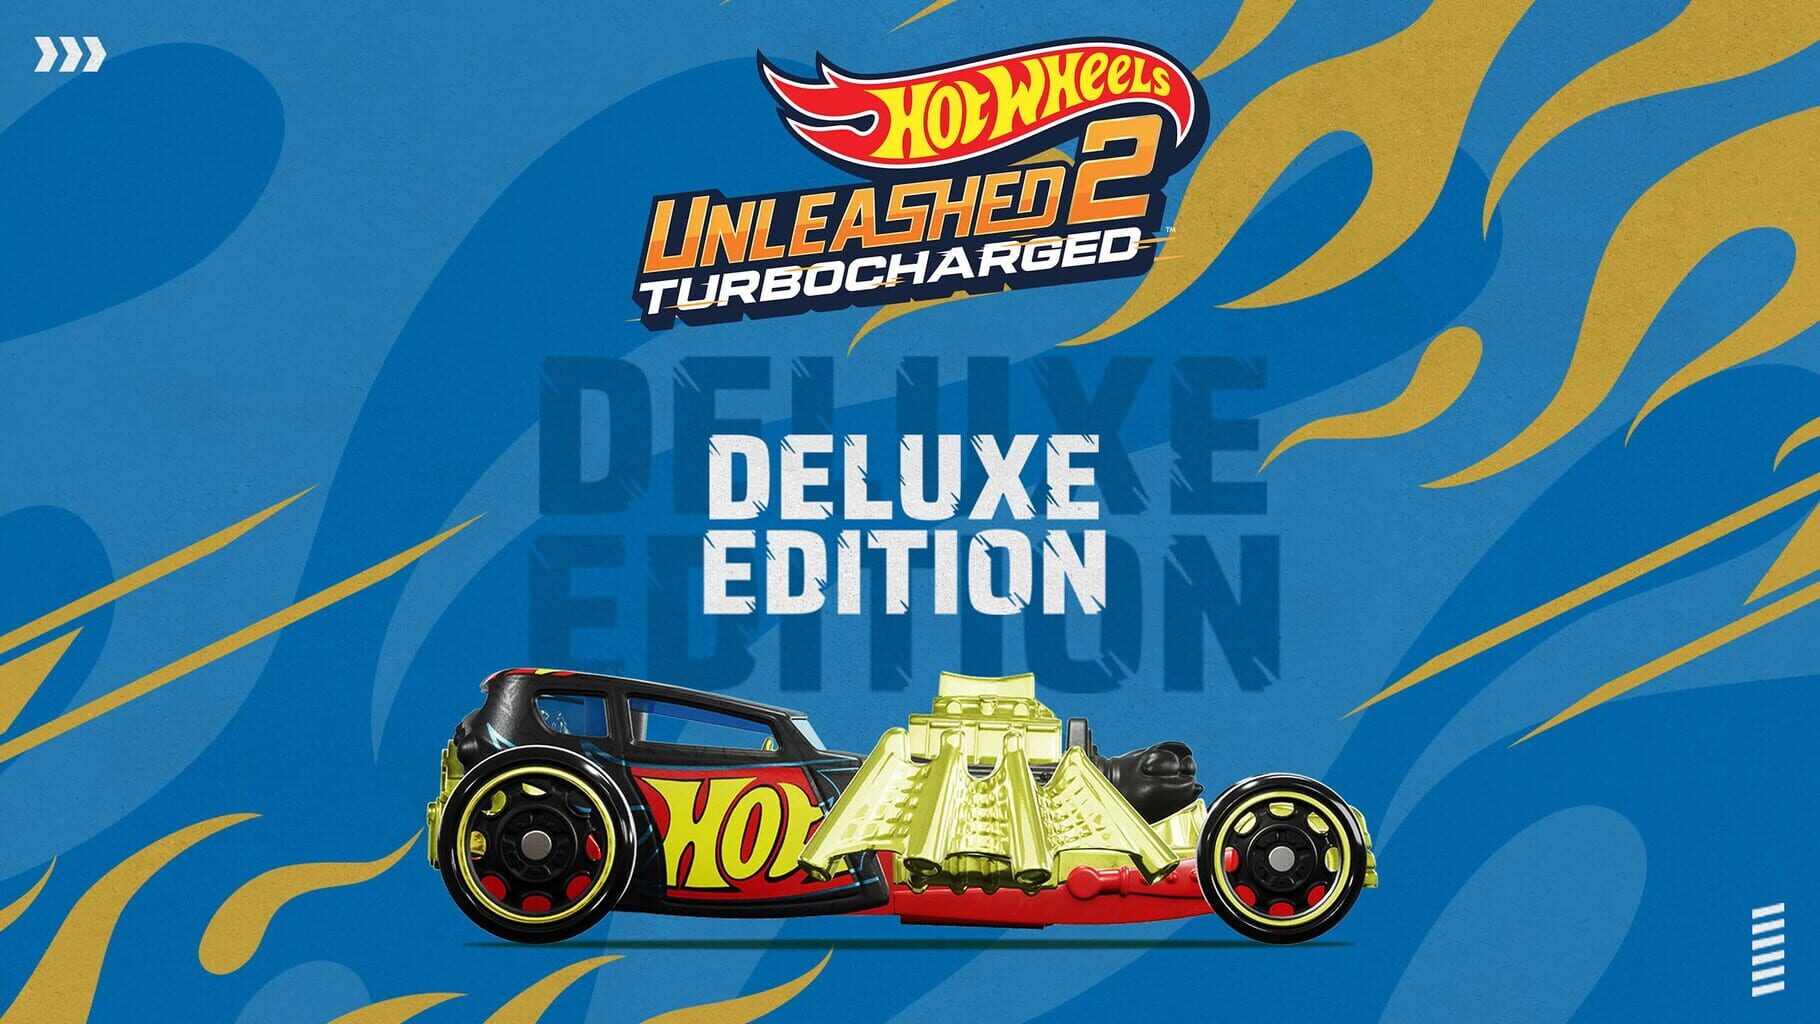 Hot Wheels Unleashed 2: Turbocharged - Deluxe Edition artwork